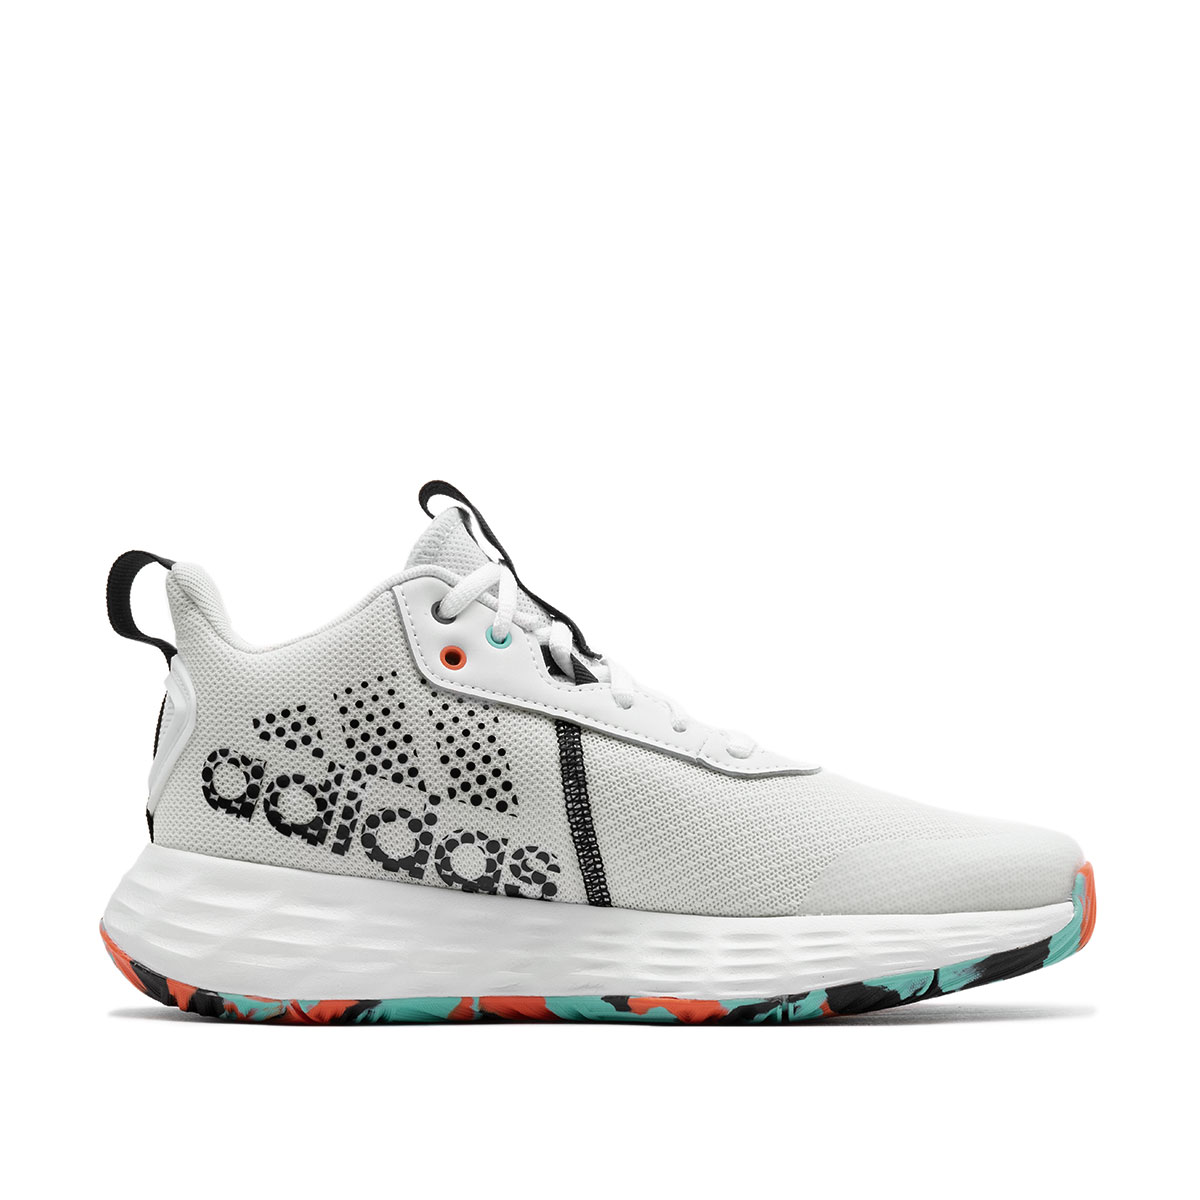 adidas Ownthegame 2.0  H01556